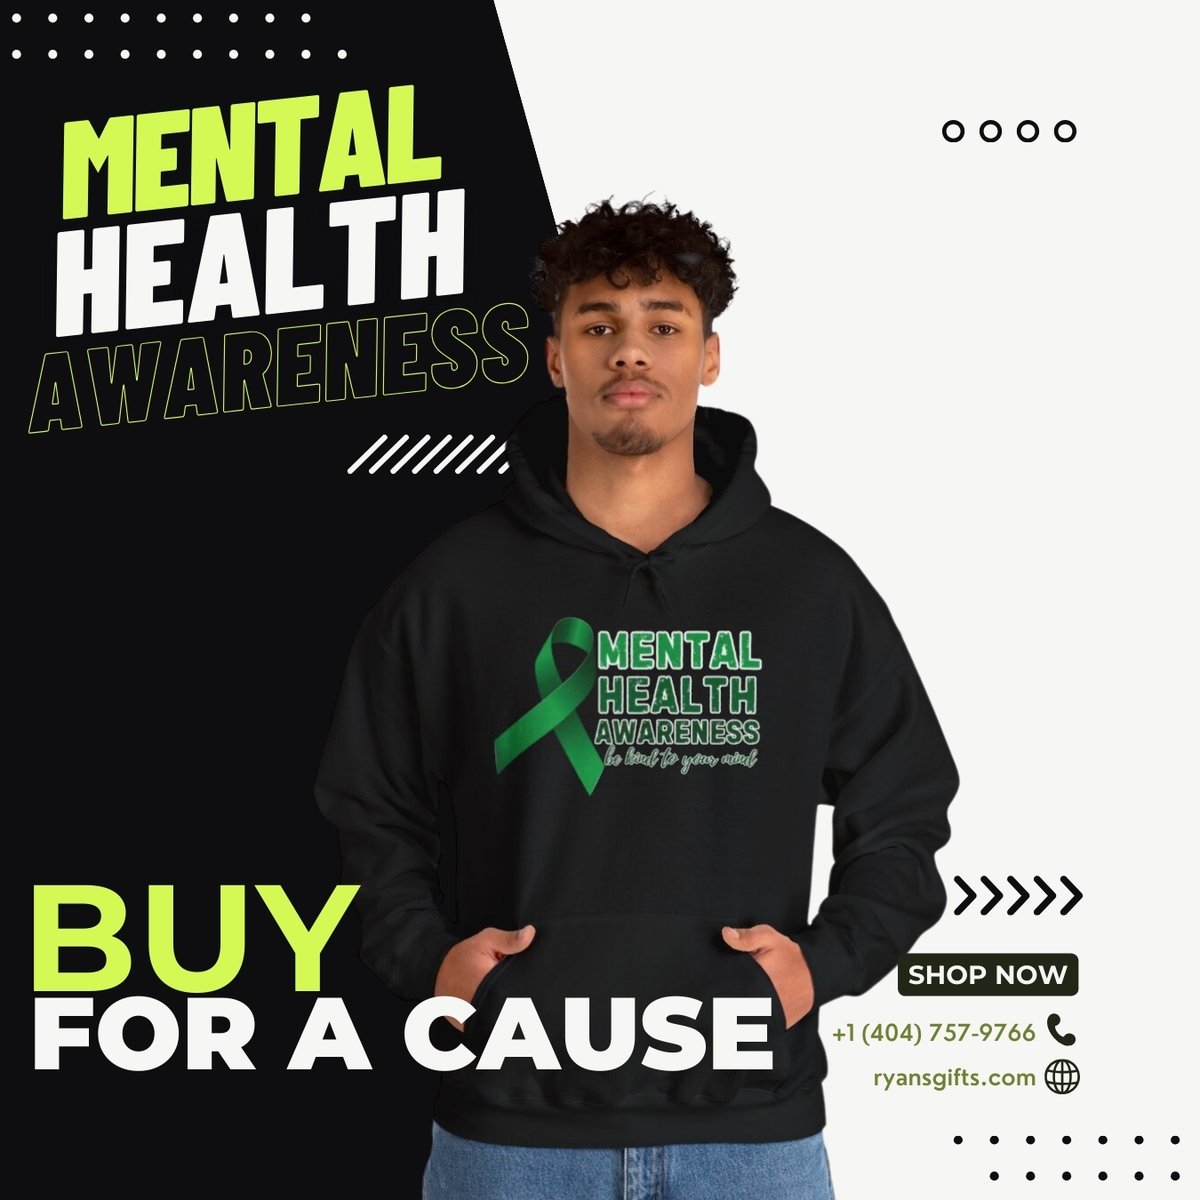 [ PRINTIFY SHOP: ryans-gifts-of-advocacy.printify.me ]
📷 Did you know?📷 One in four people will experience a mental health issue at some point in their lives. You are not alone, and together, we can break the stigma. Reach out, speak up, and spread love and understanding. 📷